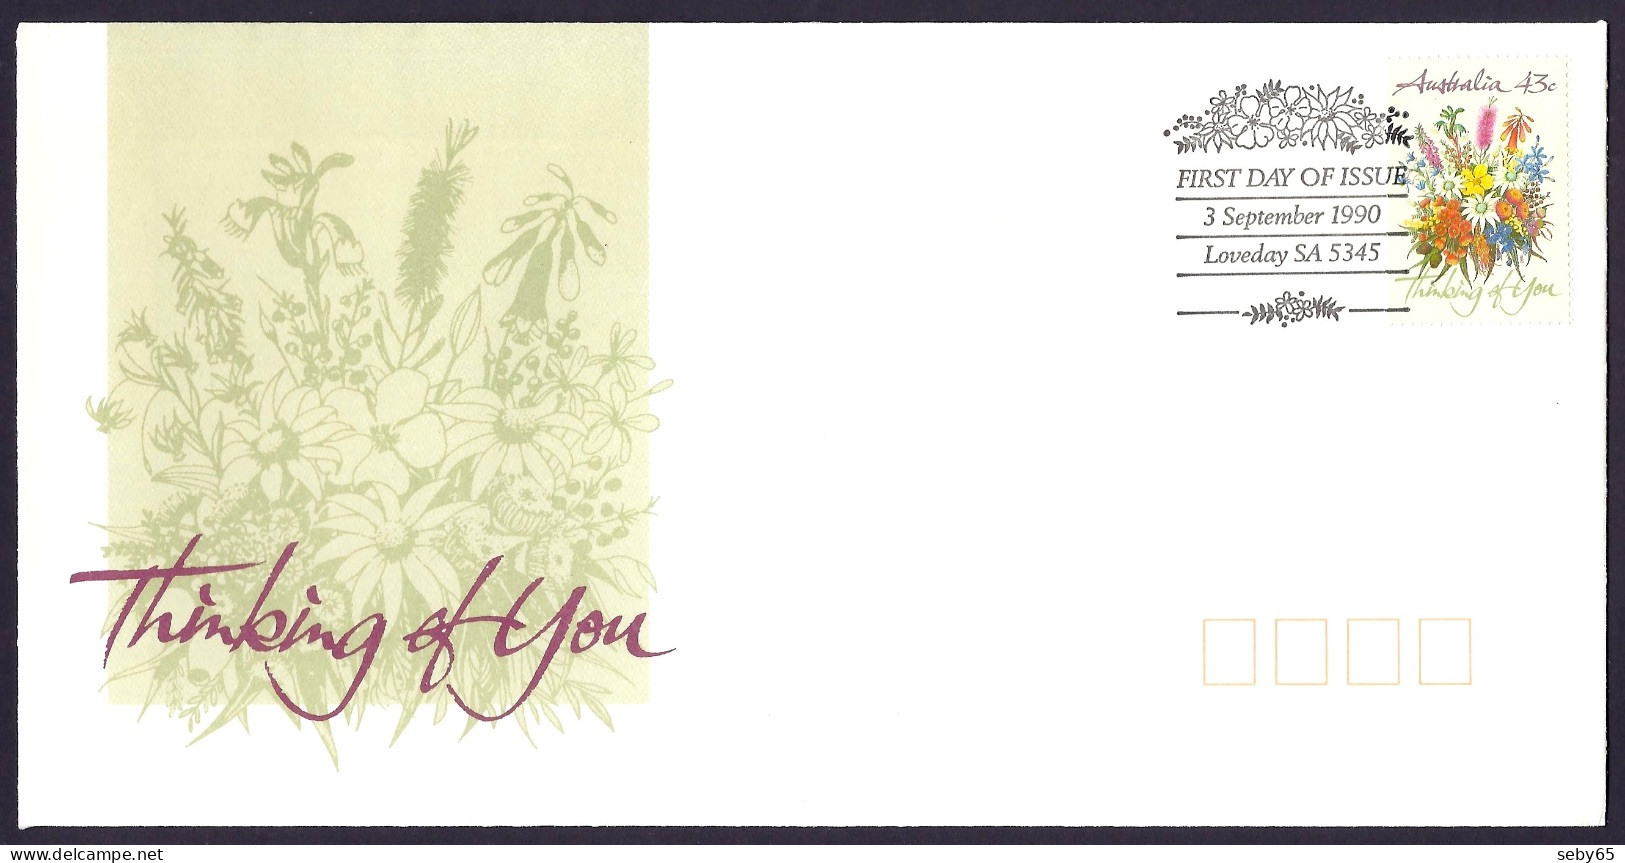 Australia 1990 - Thinking Of You, Flowers, Valentine Day  - FDC - Premiers Jours (FDC)